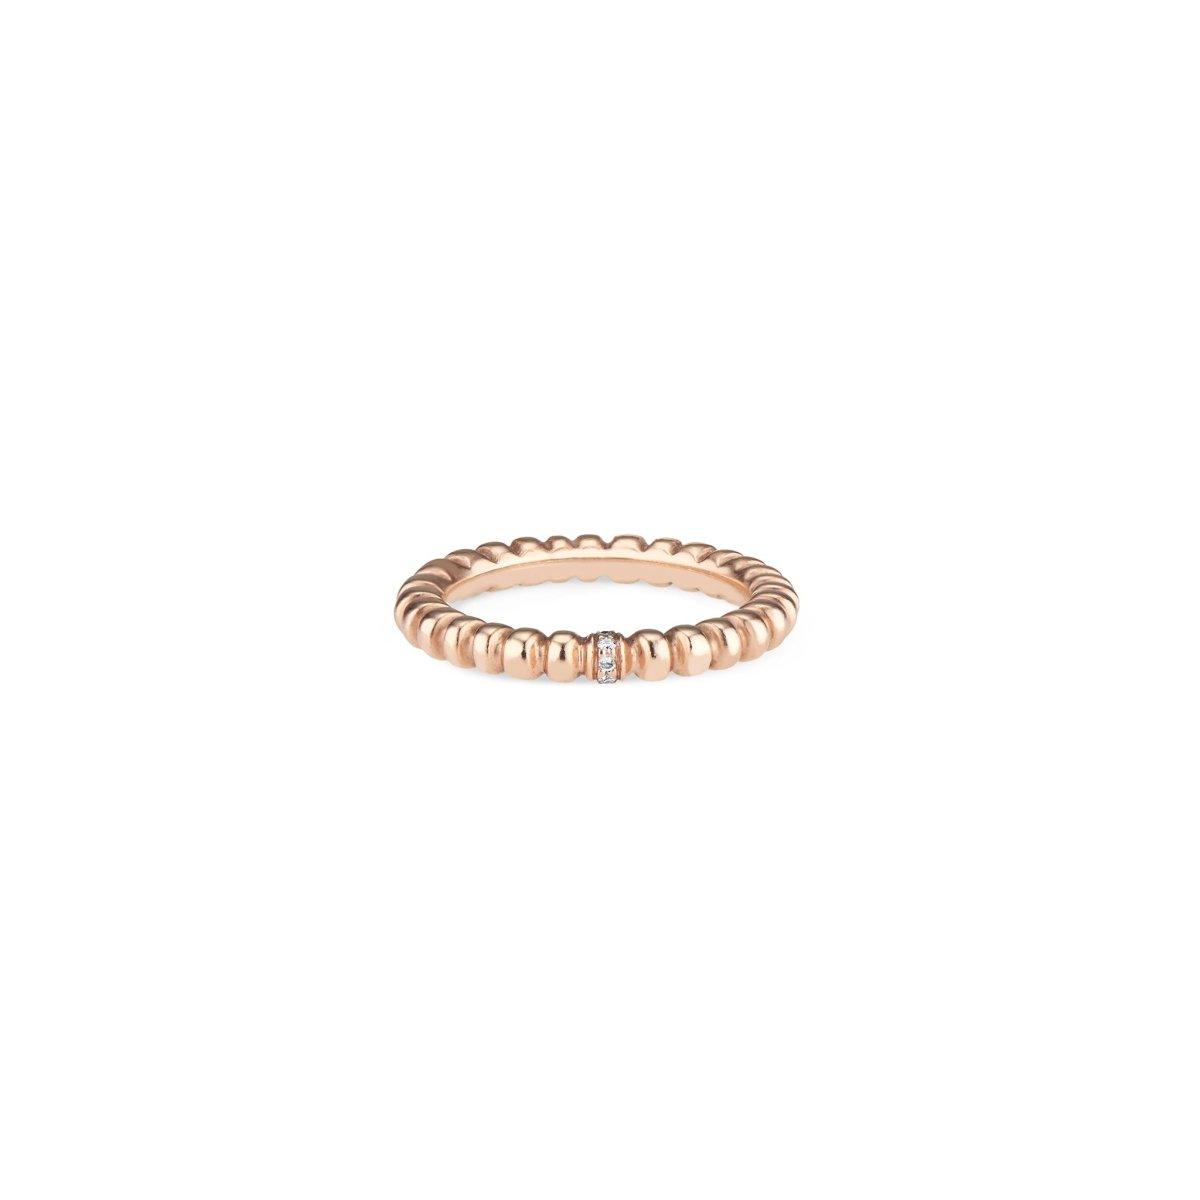 Rose Gold Crown Band with Diamonds - Nataly Aponte